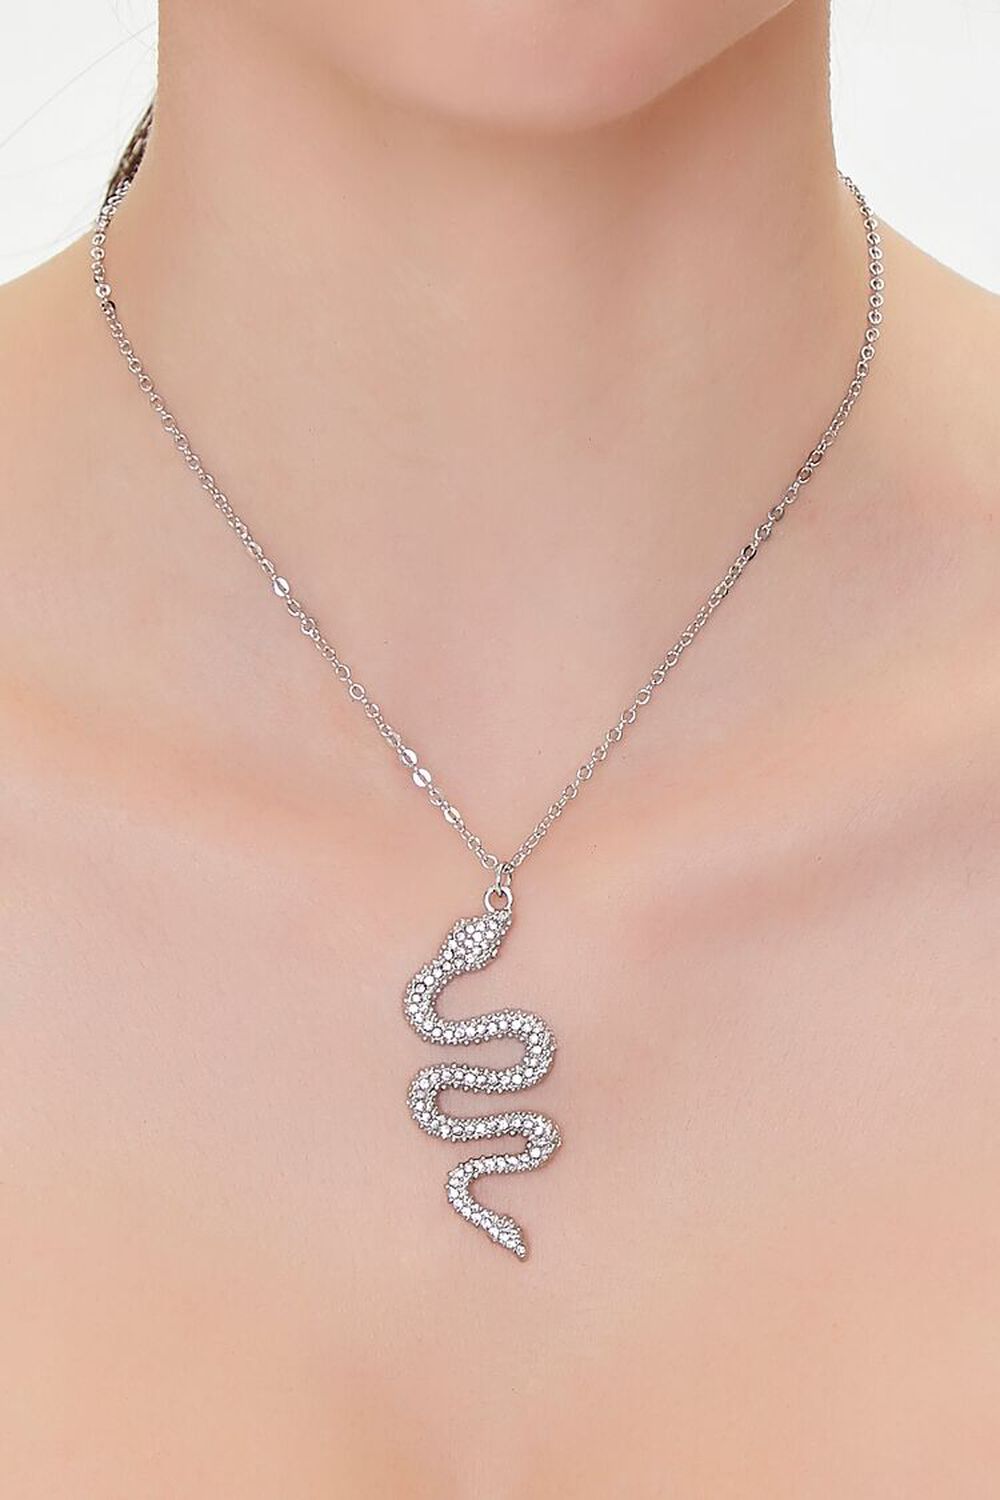 SILVER/CLEAR Rhinestone Snake Pendant Necklace, image 1